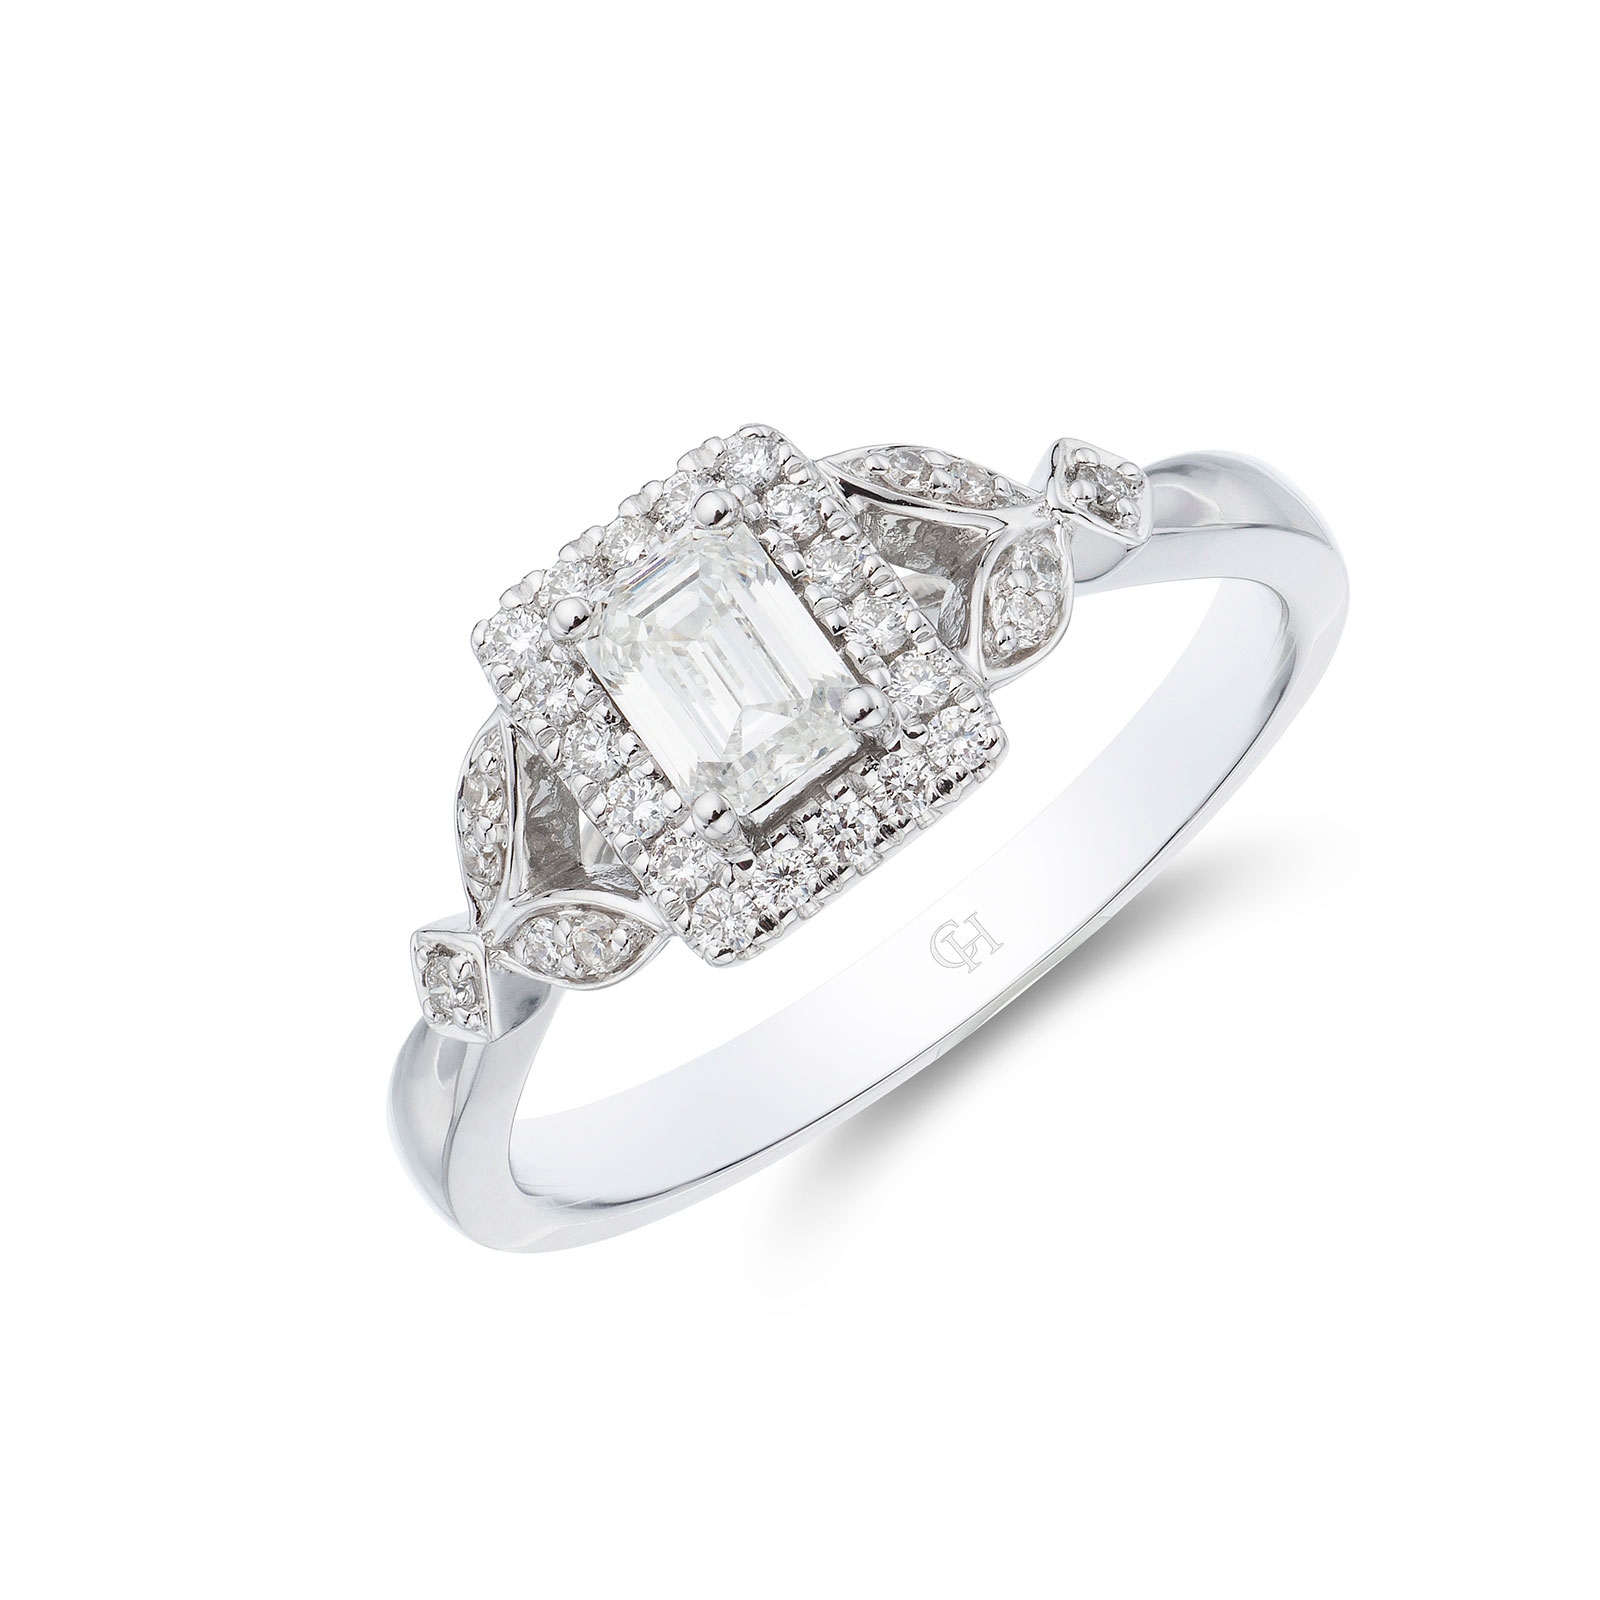 18ct White Gold 0.55ct Mixed Diamond Cluster Ring